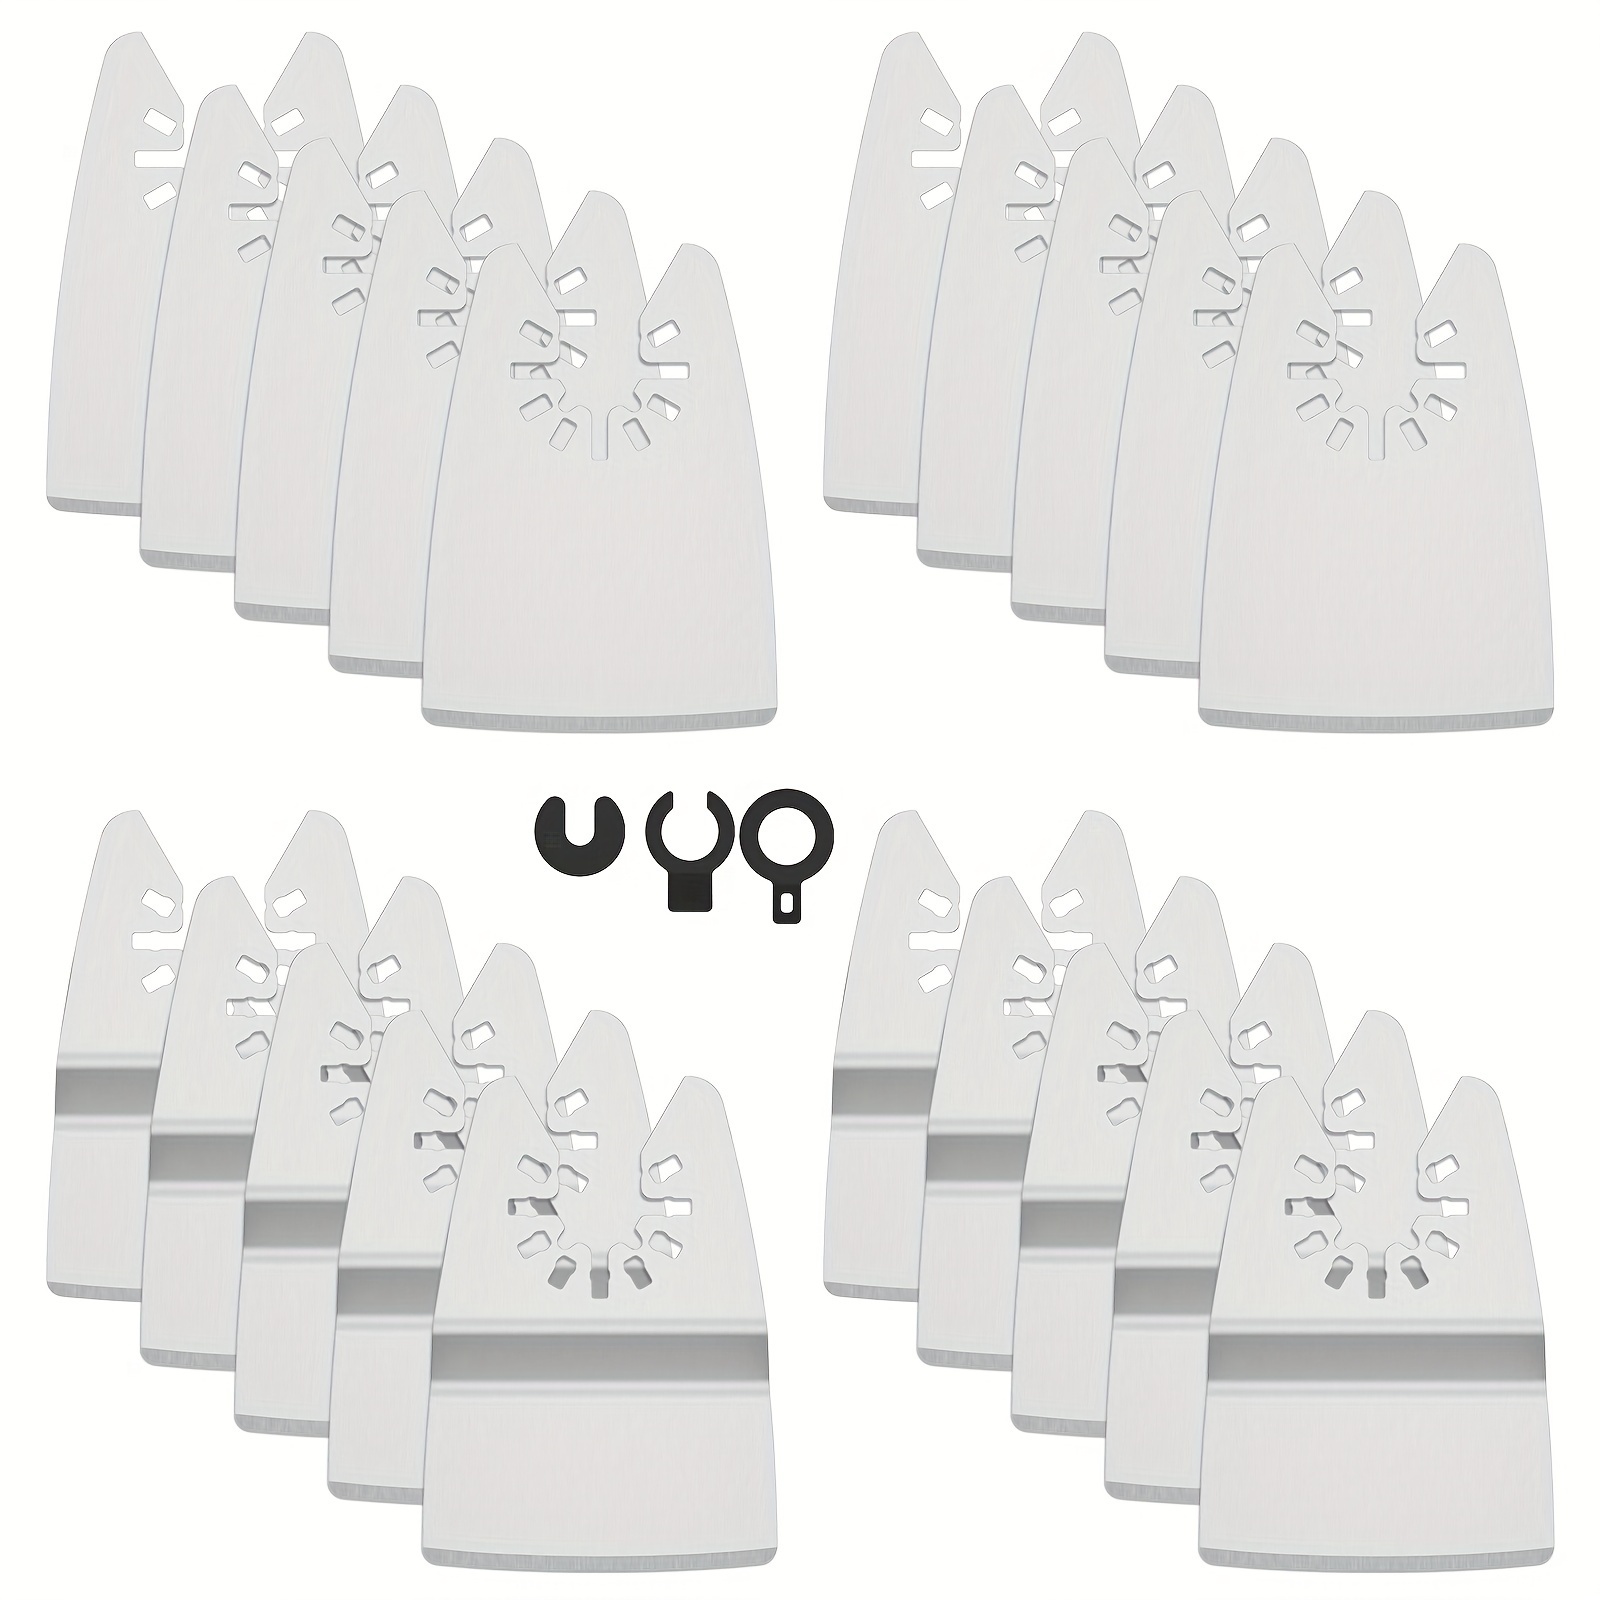 Extended Glue Removal Spatula With 10Pcs Metal/Plastic Blades